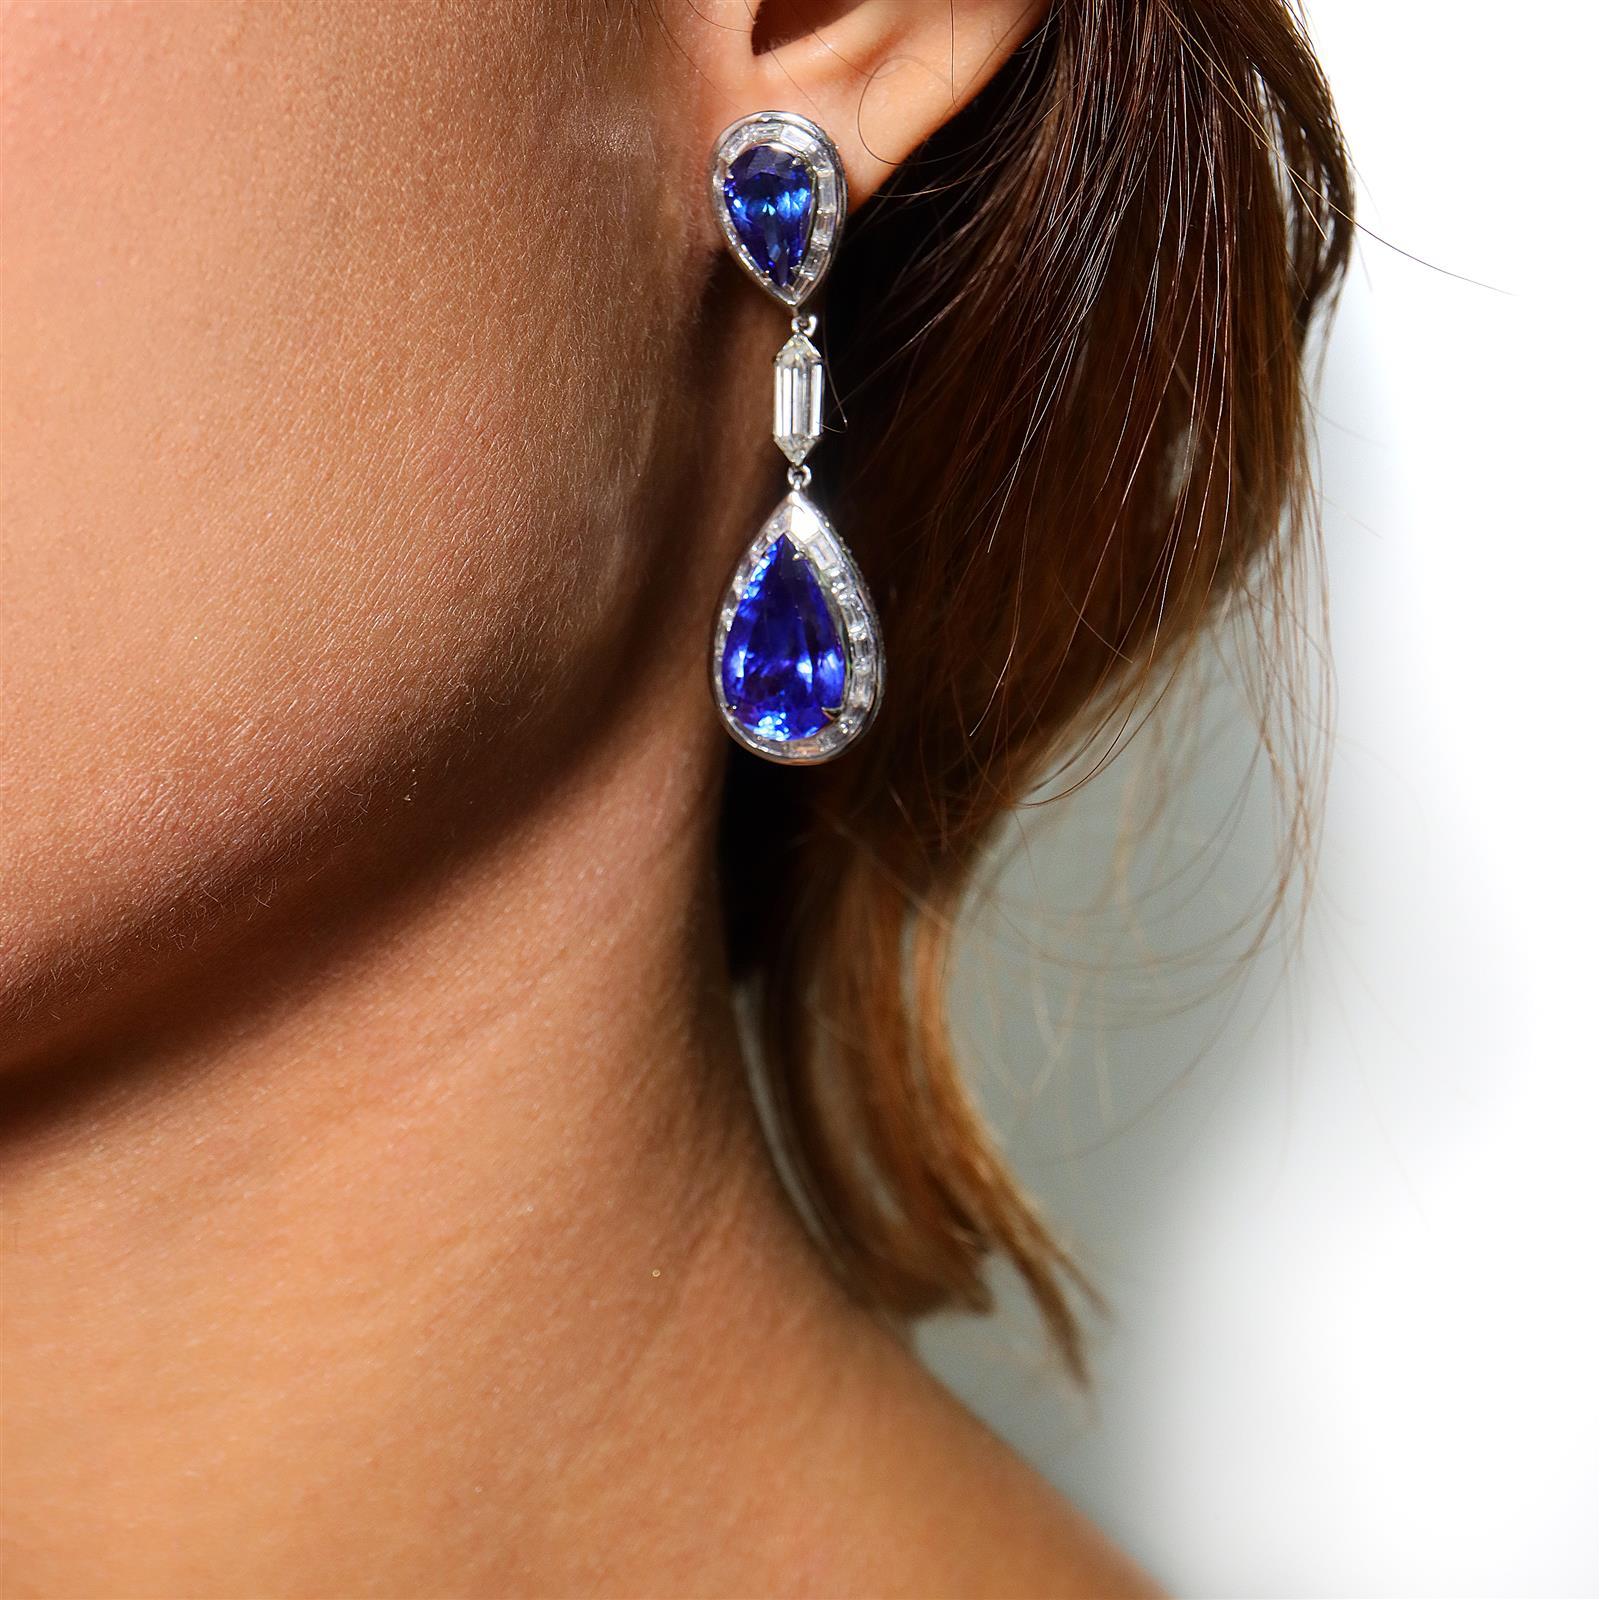 Contemporary Nigaam 6.45 Ct.TW. Diamond and 22.39 Ct. T.W Tanzanite Drop Earrings in 18K Gold